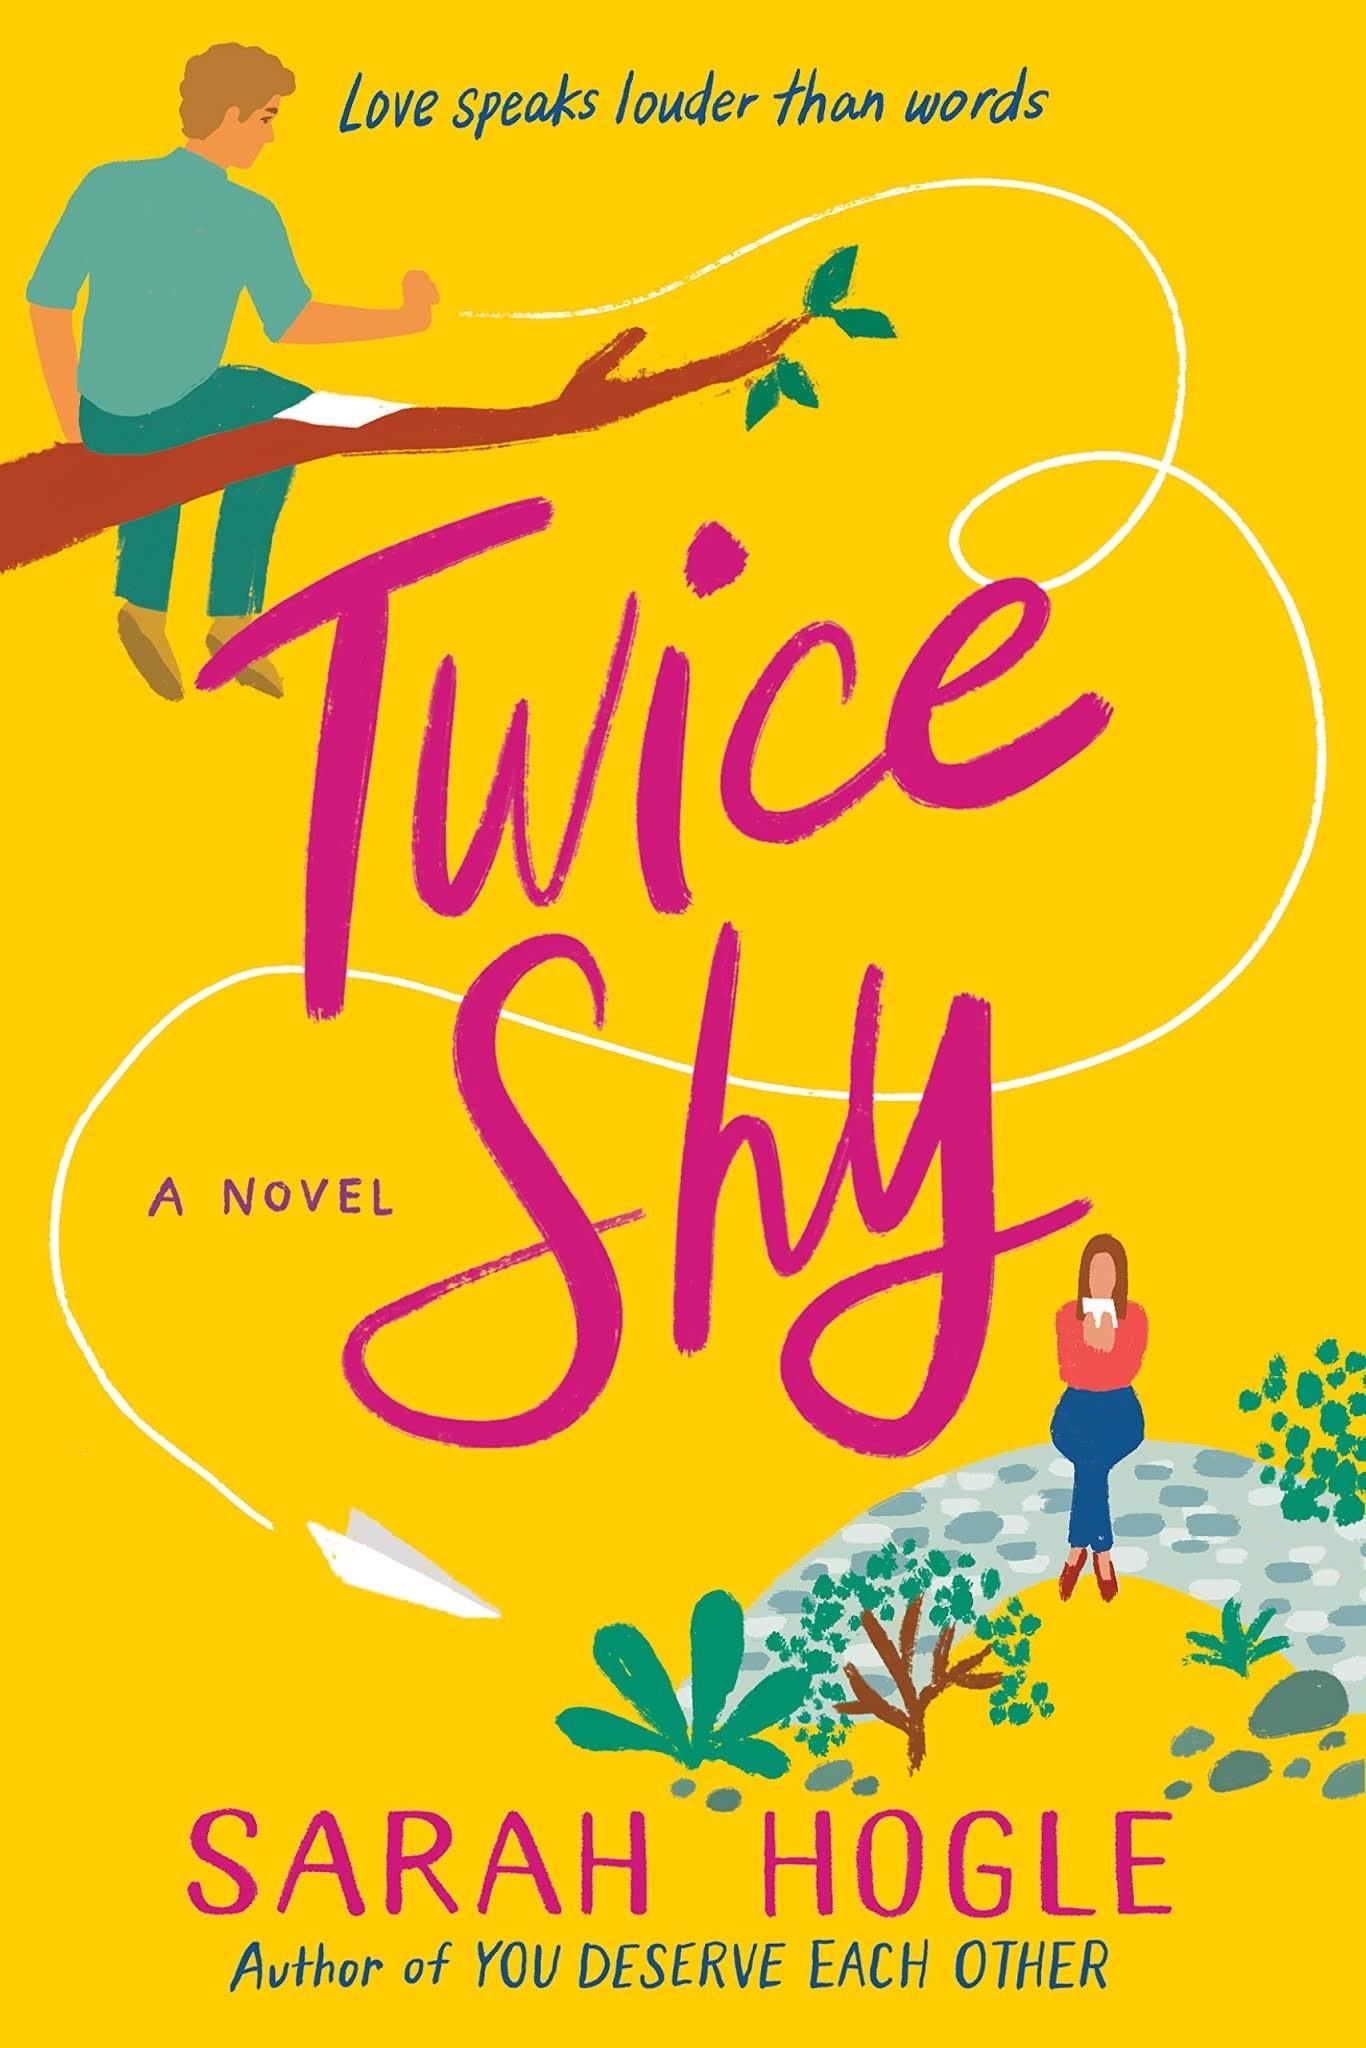 Twice Shy book cover. Book by Sarah Hogle